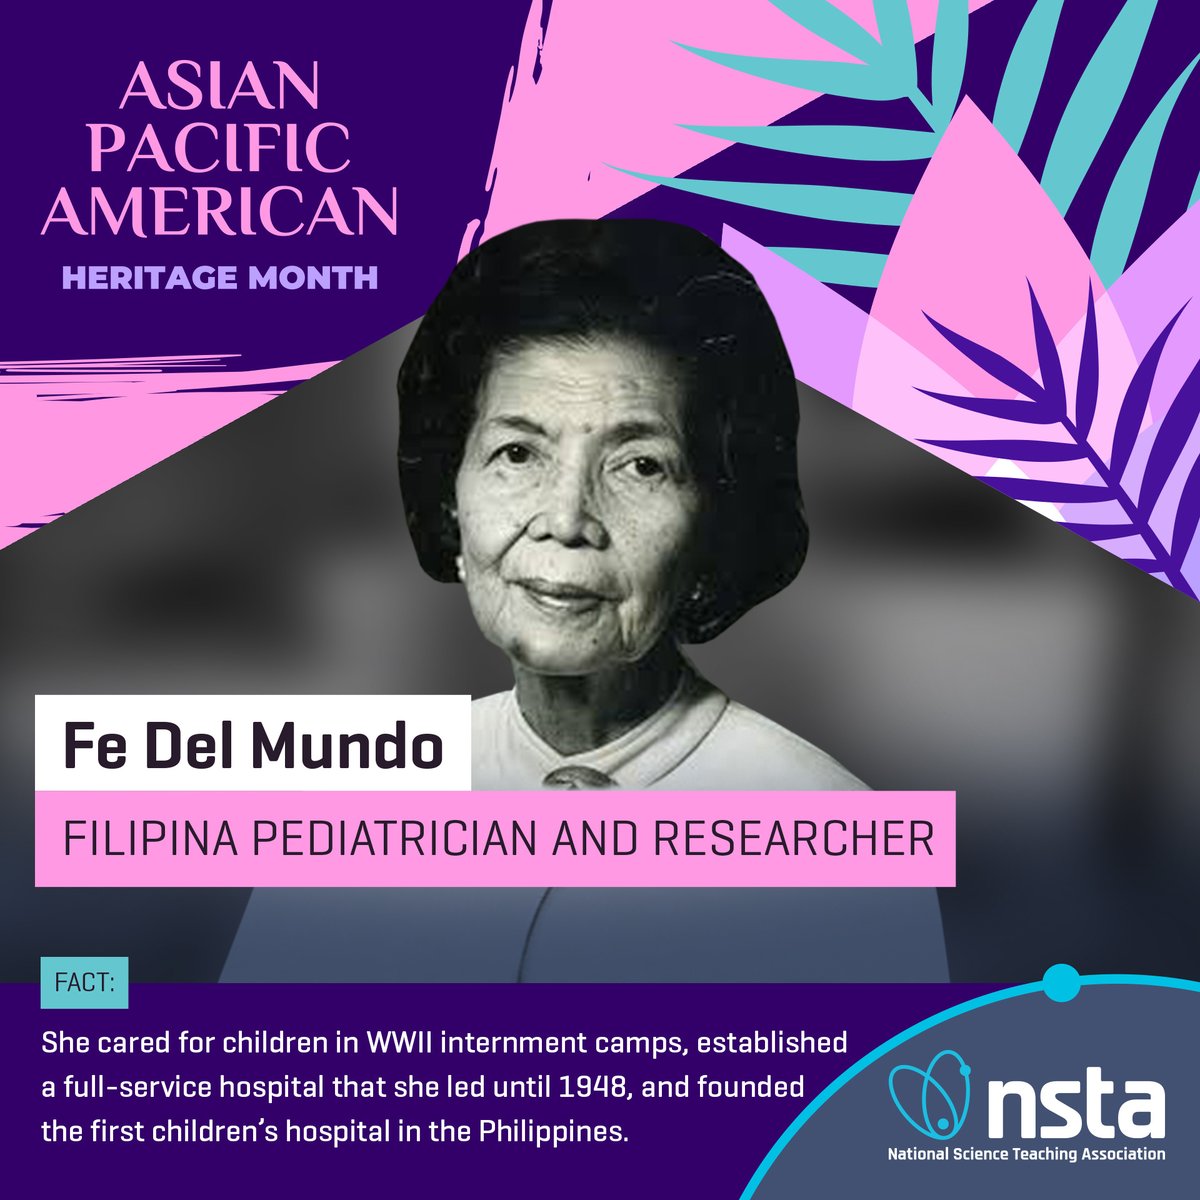 Join NSTA in celebrating Fe Del Mundo this #AsianPacificAmericanHeritageMonth! Filipina pediatrician, Del Mundo cared for children in WWII internment camps and founded the first children’s hospital in the Philippines. Read more about her here: bit.ly/44Y8v4J